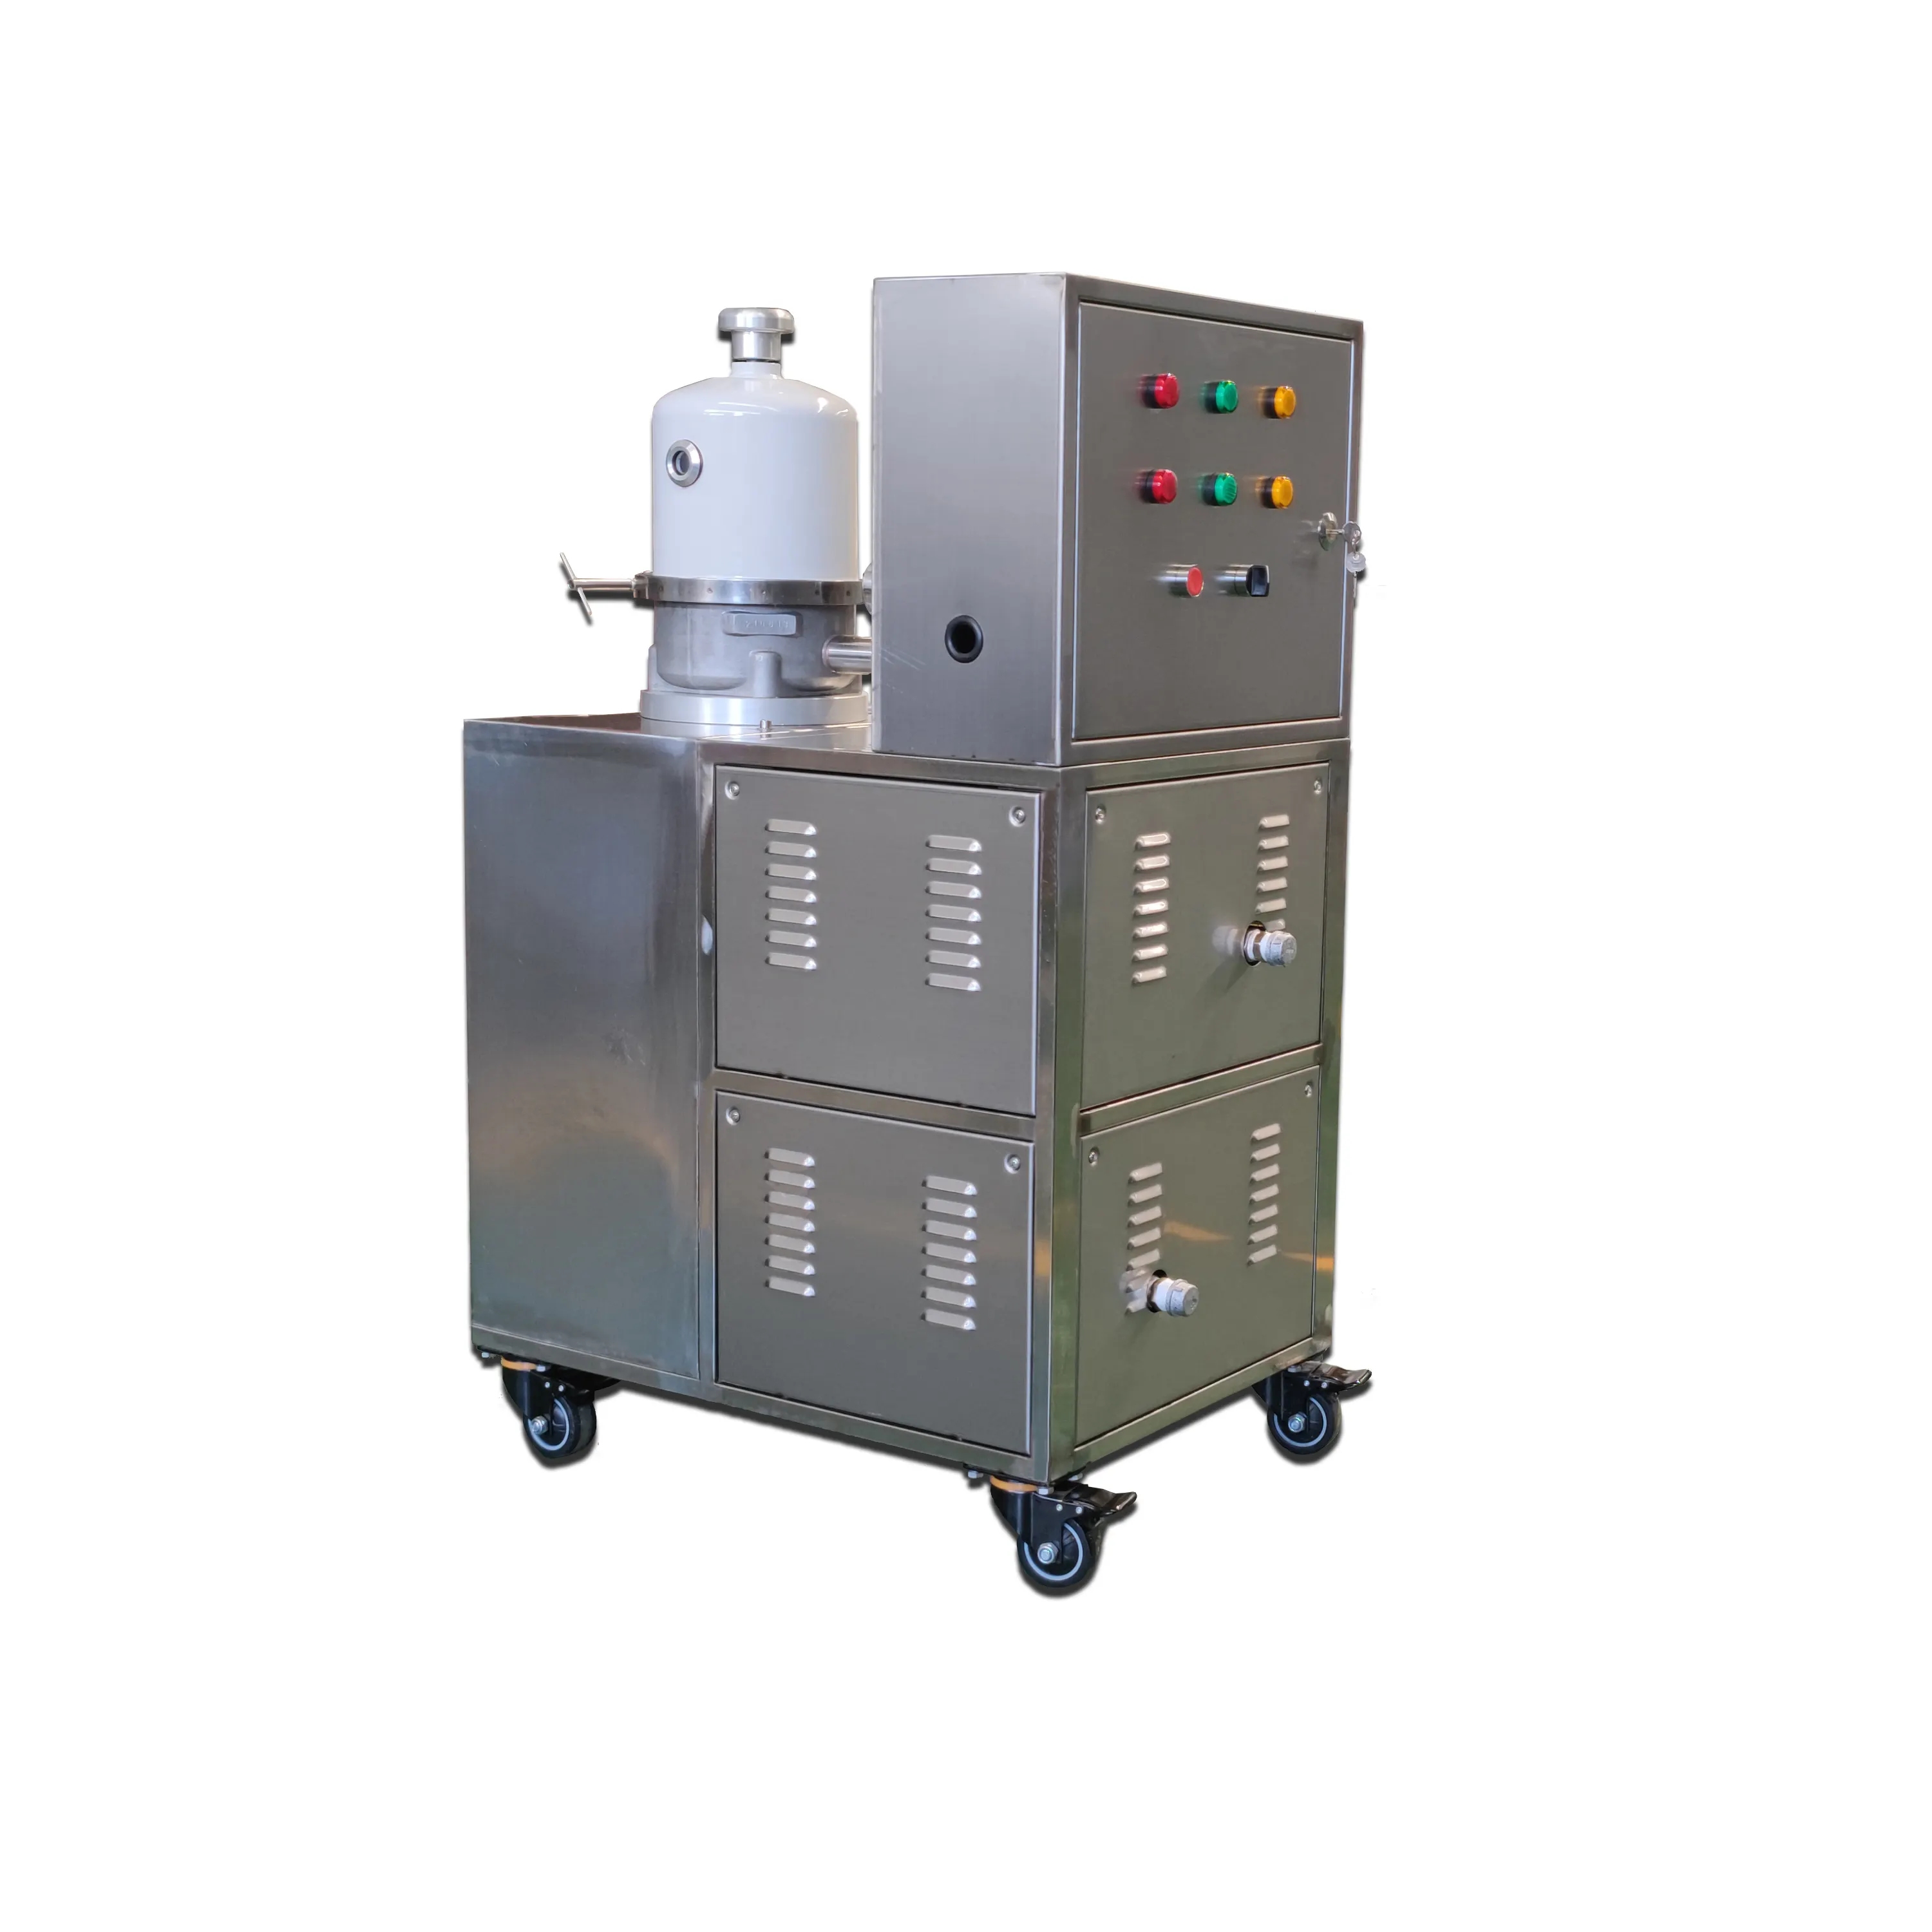 Oil purification machine for rolling oil